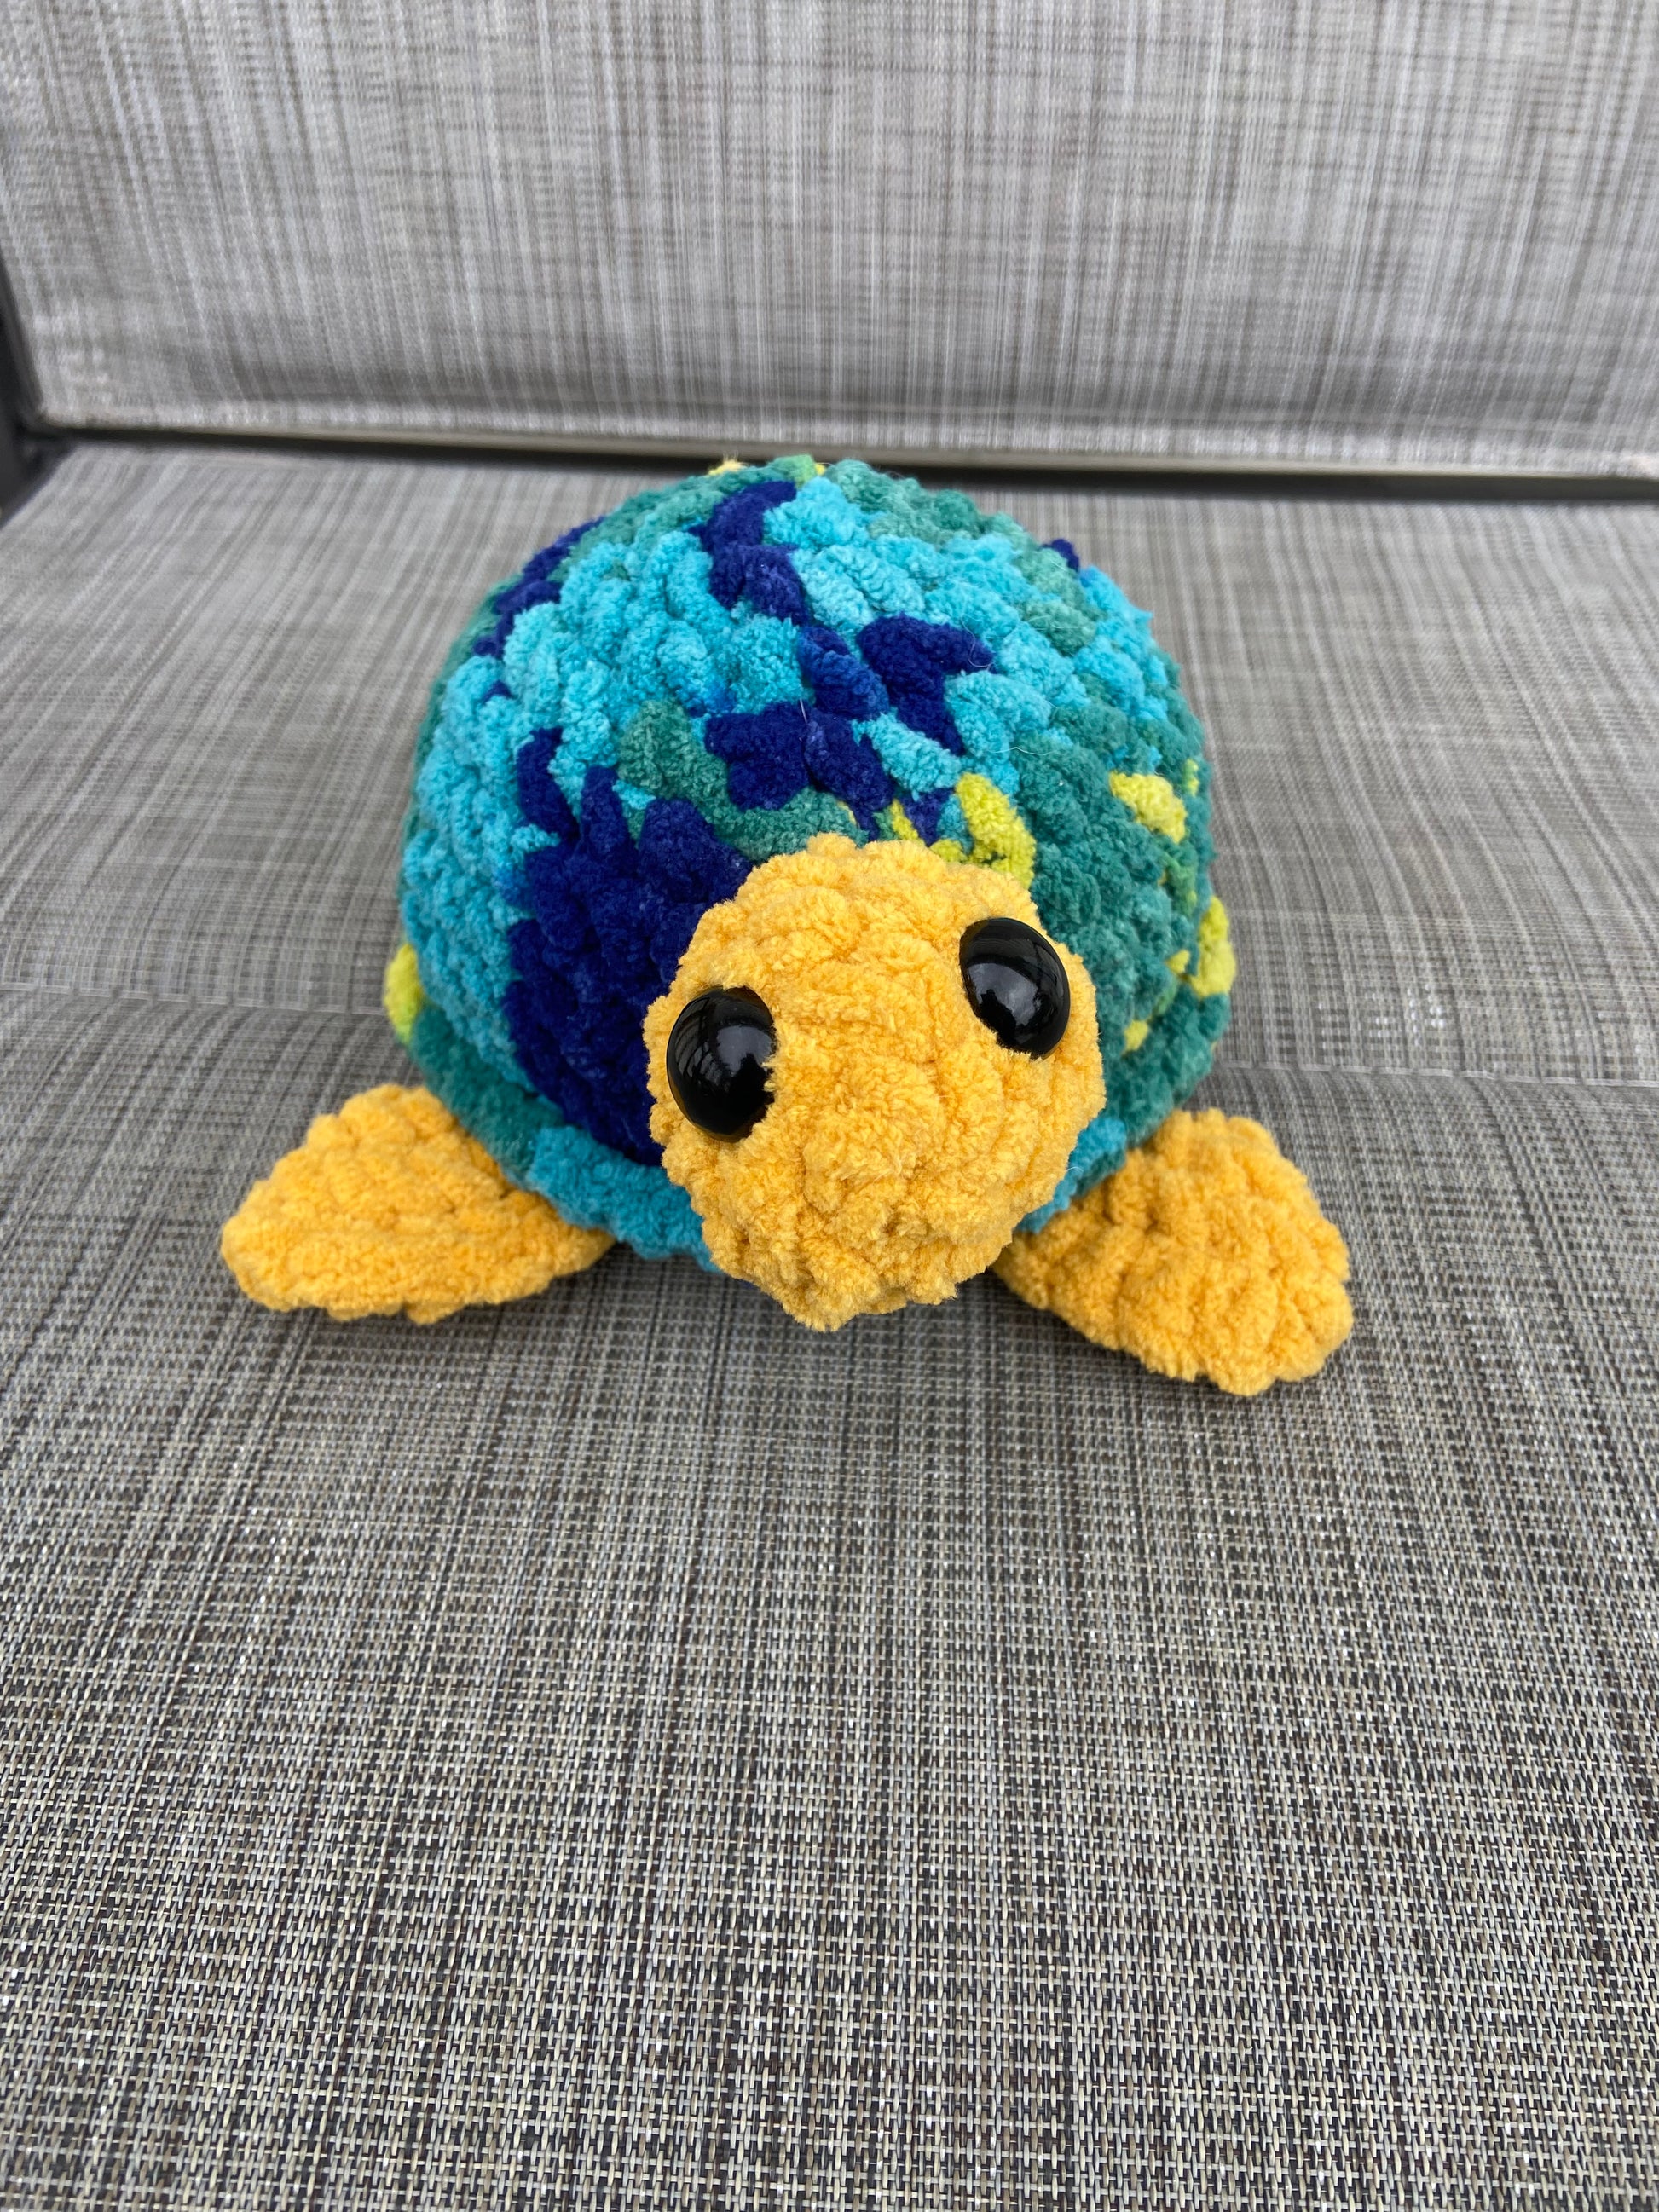 Small crocheted turtle figurine with intricate shell design